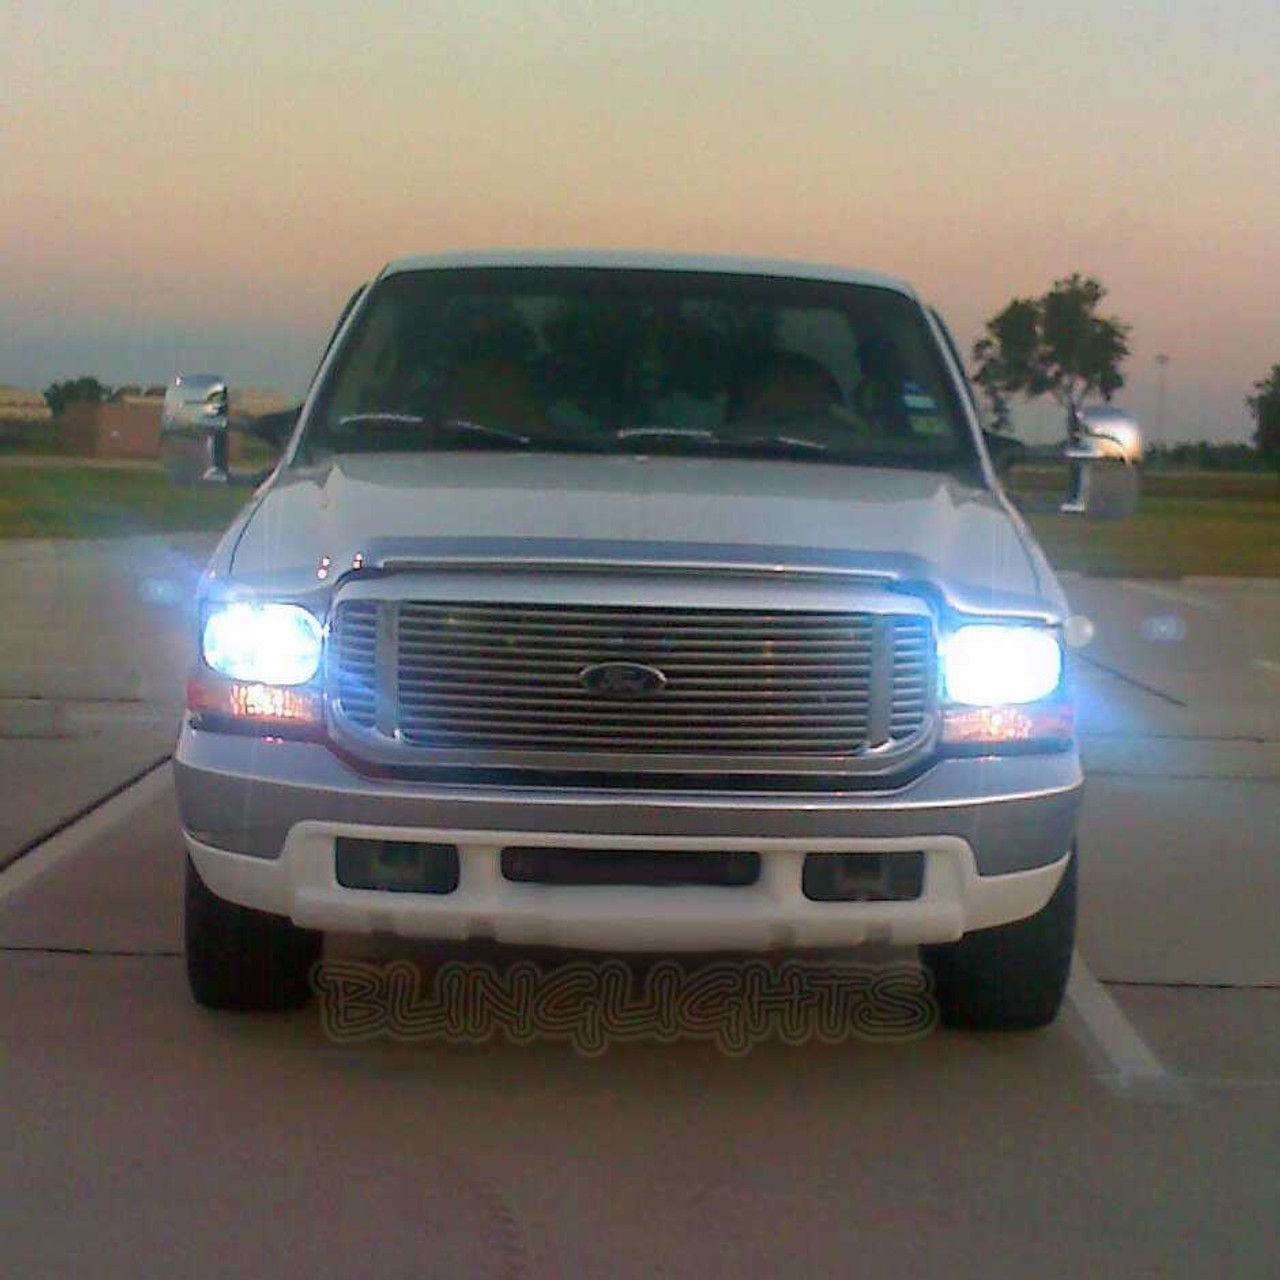 Ford F-250 F250 for Xenon HID Conversion Kit Headlamps Headlights Head Lamps Lights Super Duty HIDs